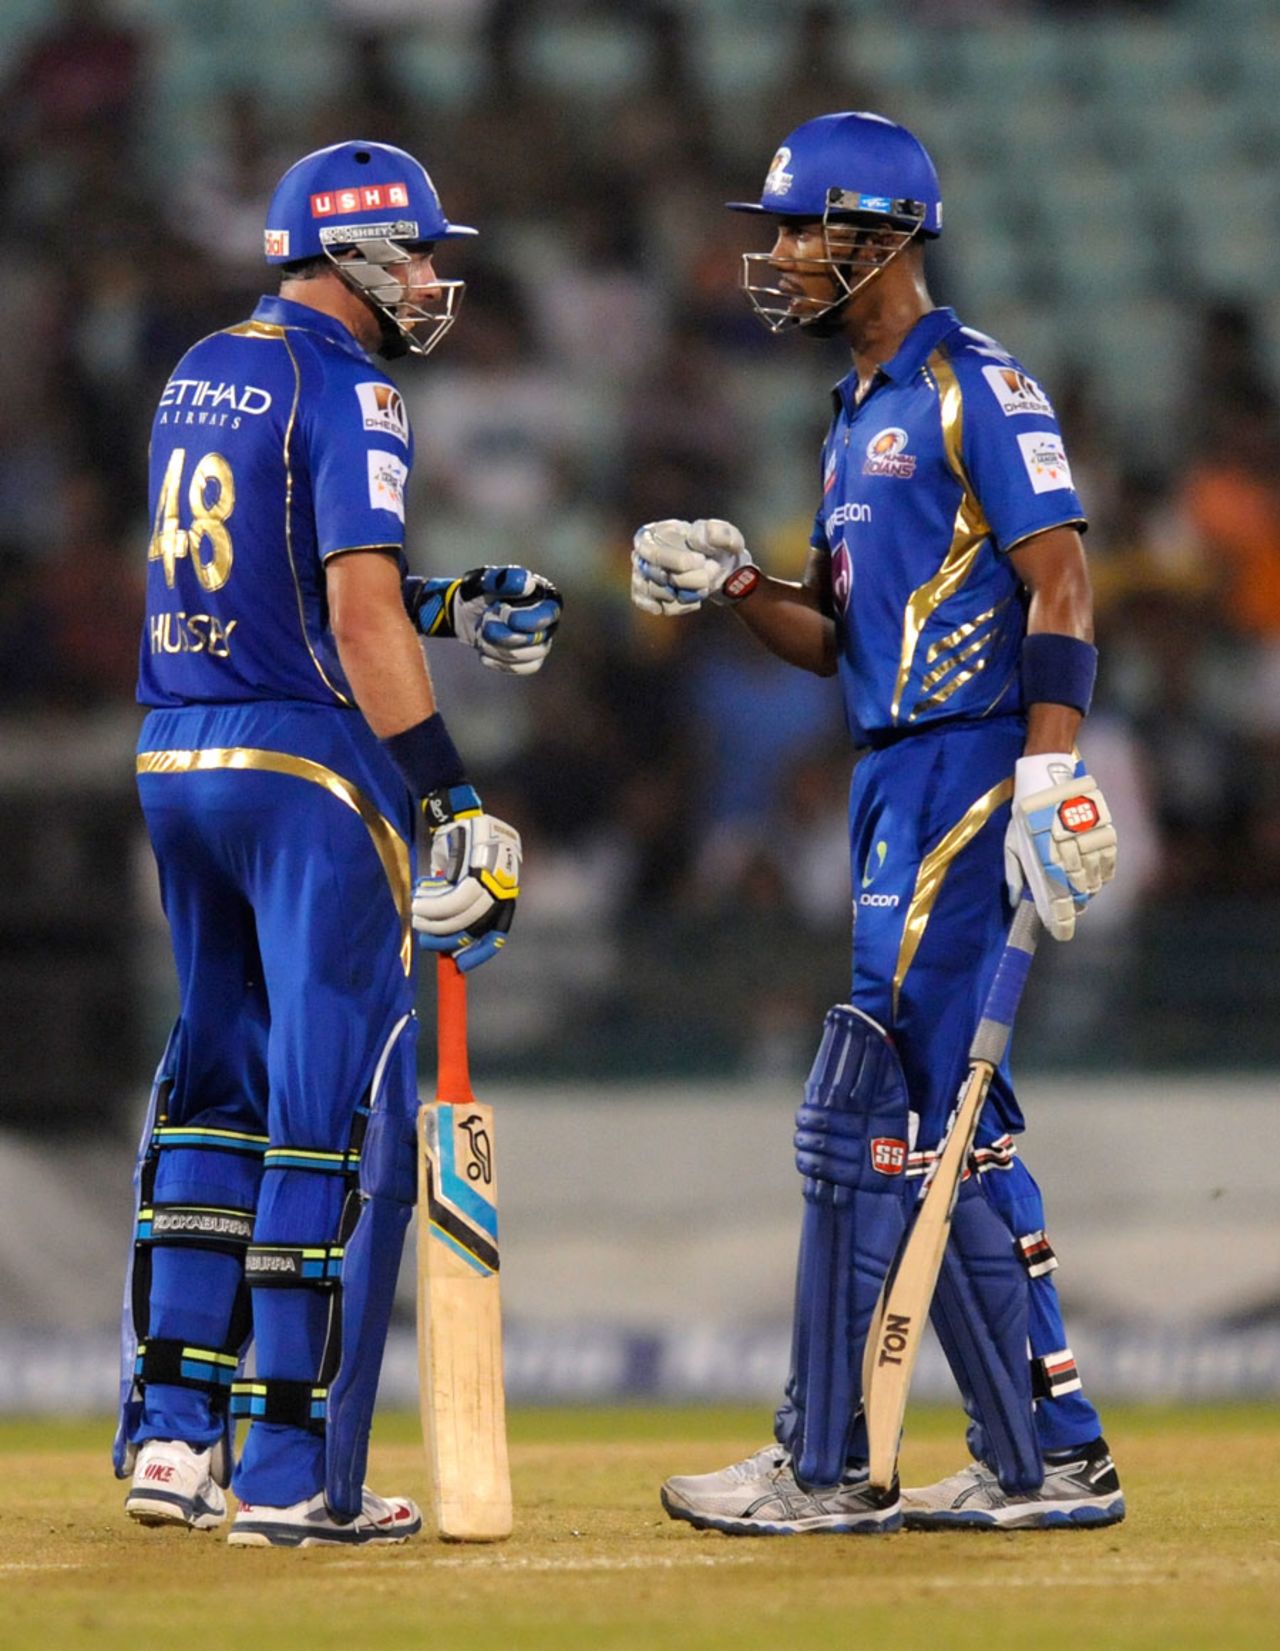 Michael Hussey and Lendl Simmons added 139 runs for the first wicket, Mumbai Indians v Southern Express, CLT20, Raipur, September 14, 2014